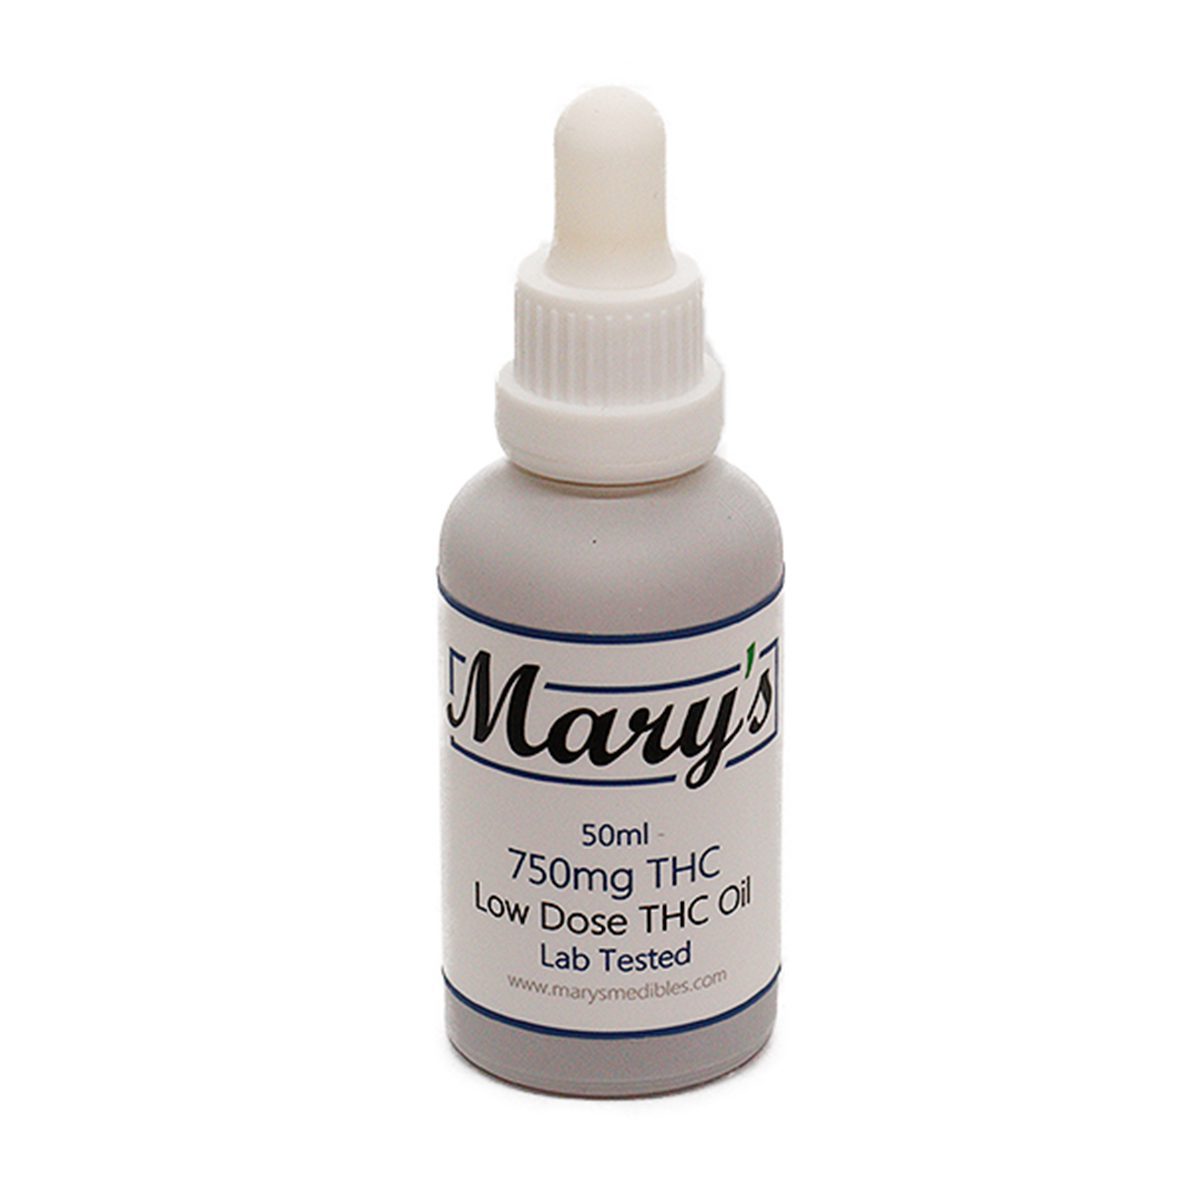 B uy Low Dose 750mg THC Tincture By Mary's Medibles